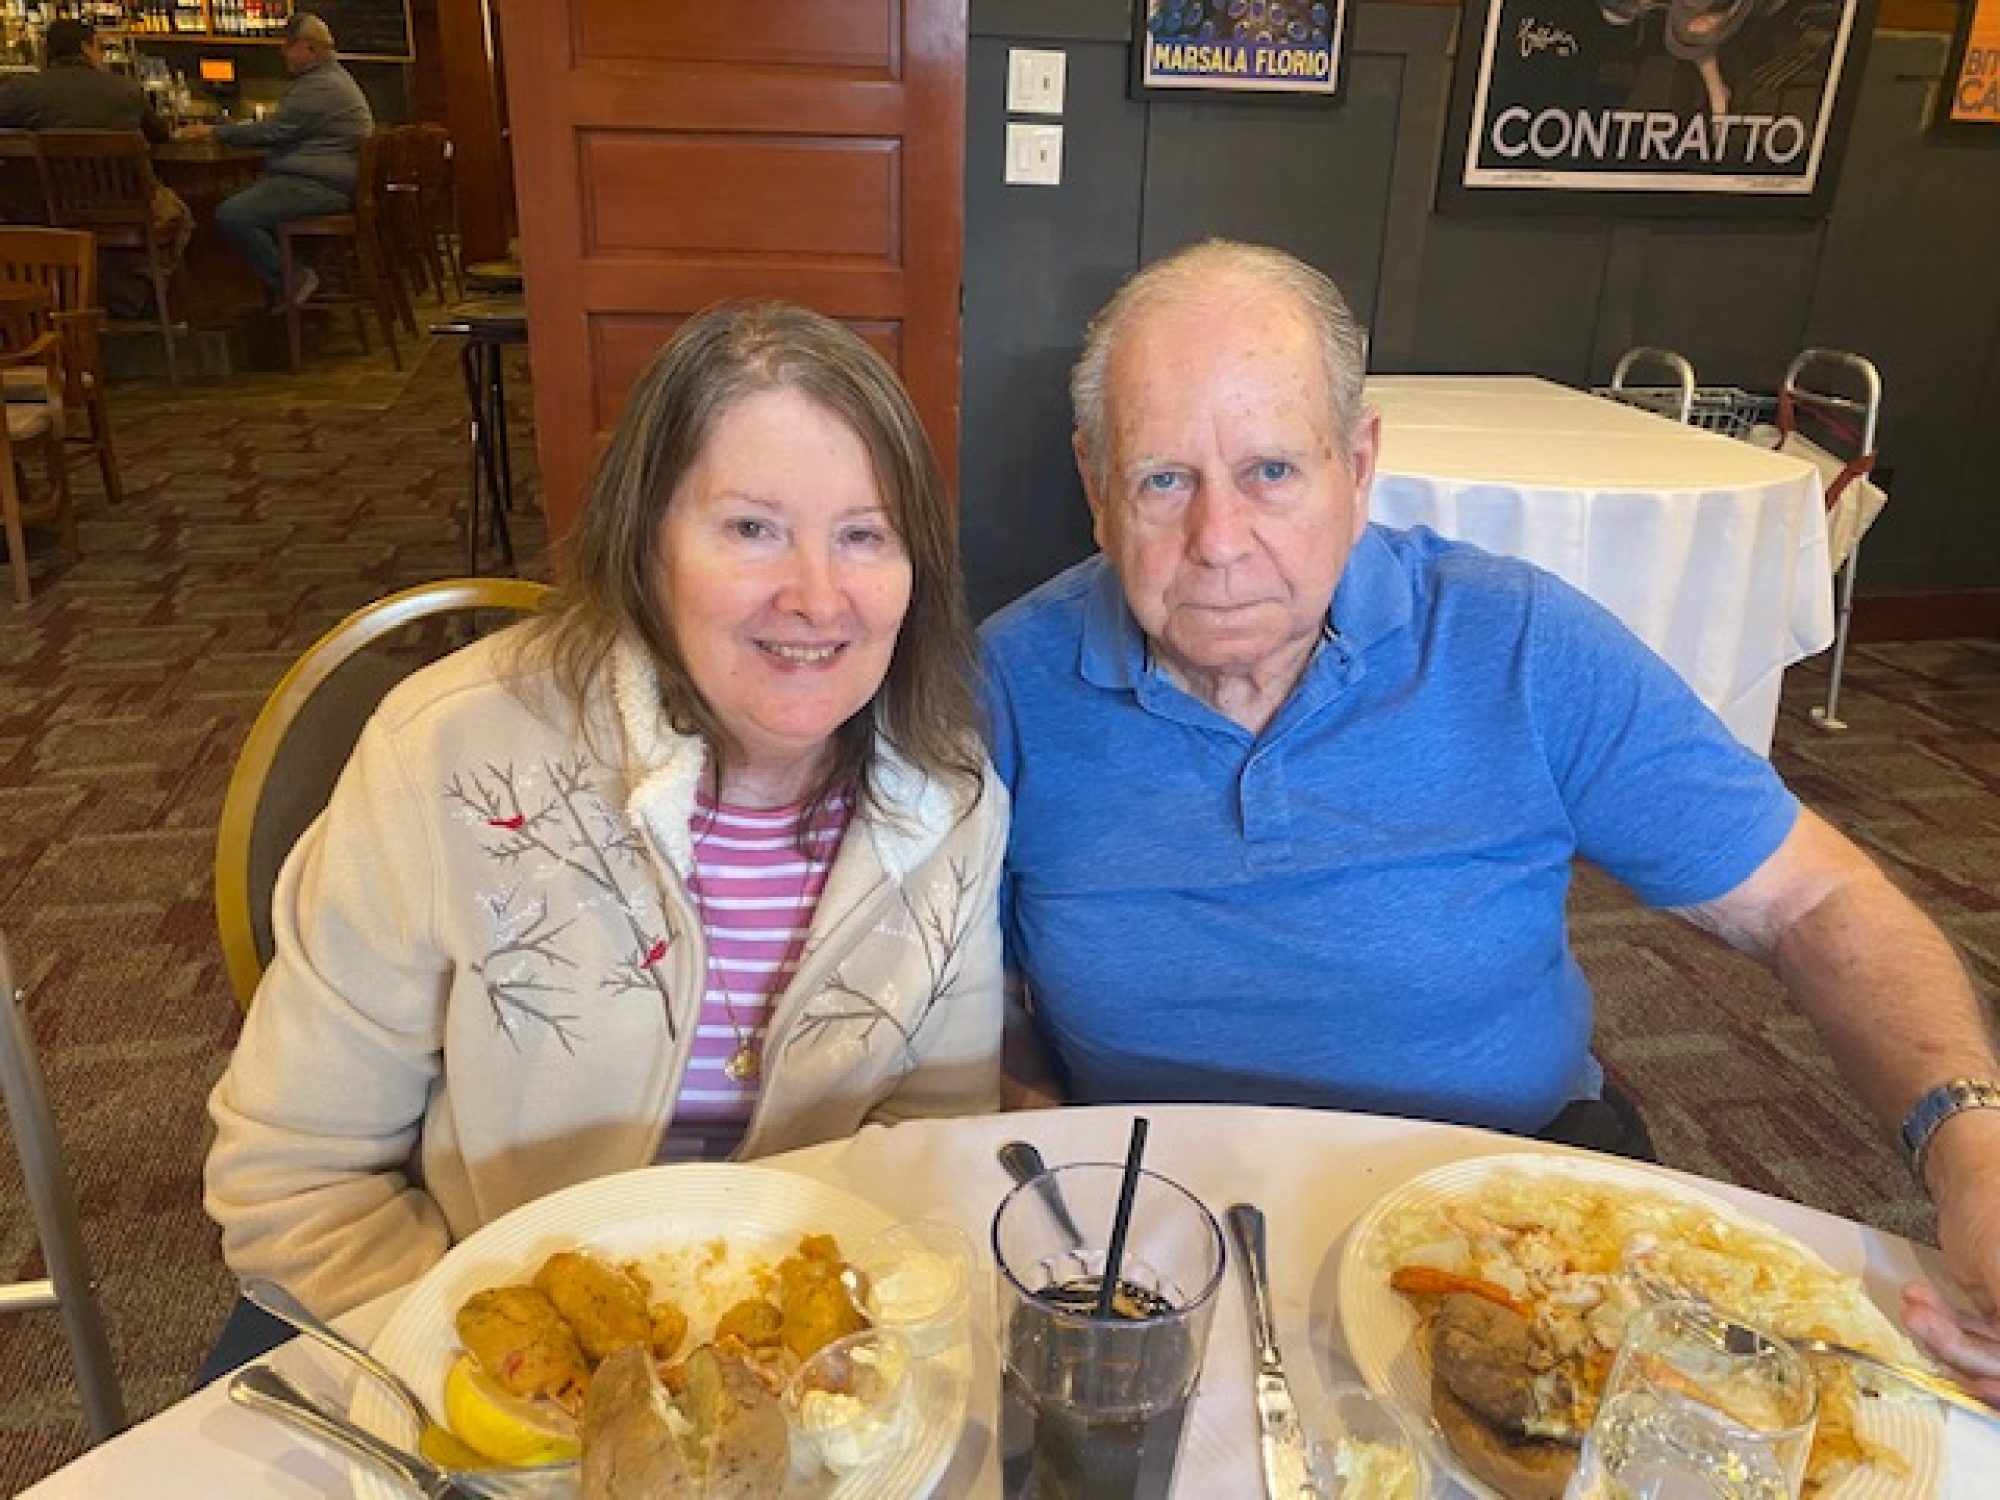 A couple, who are residents, enjoy a meal out.